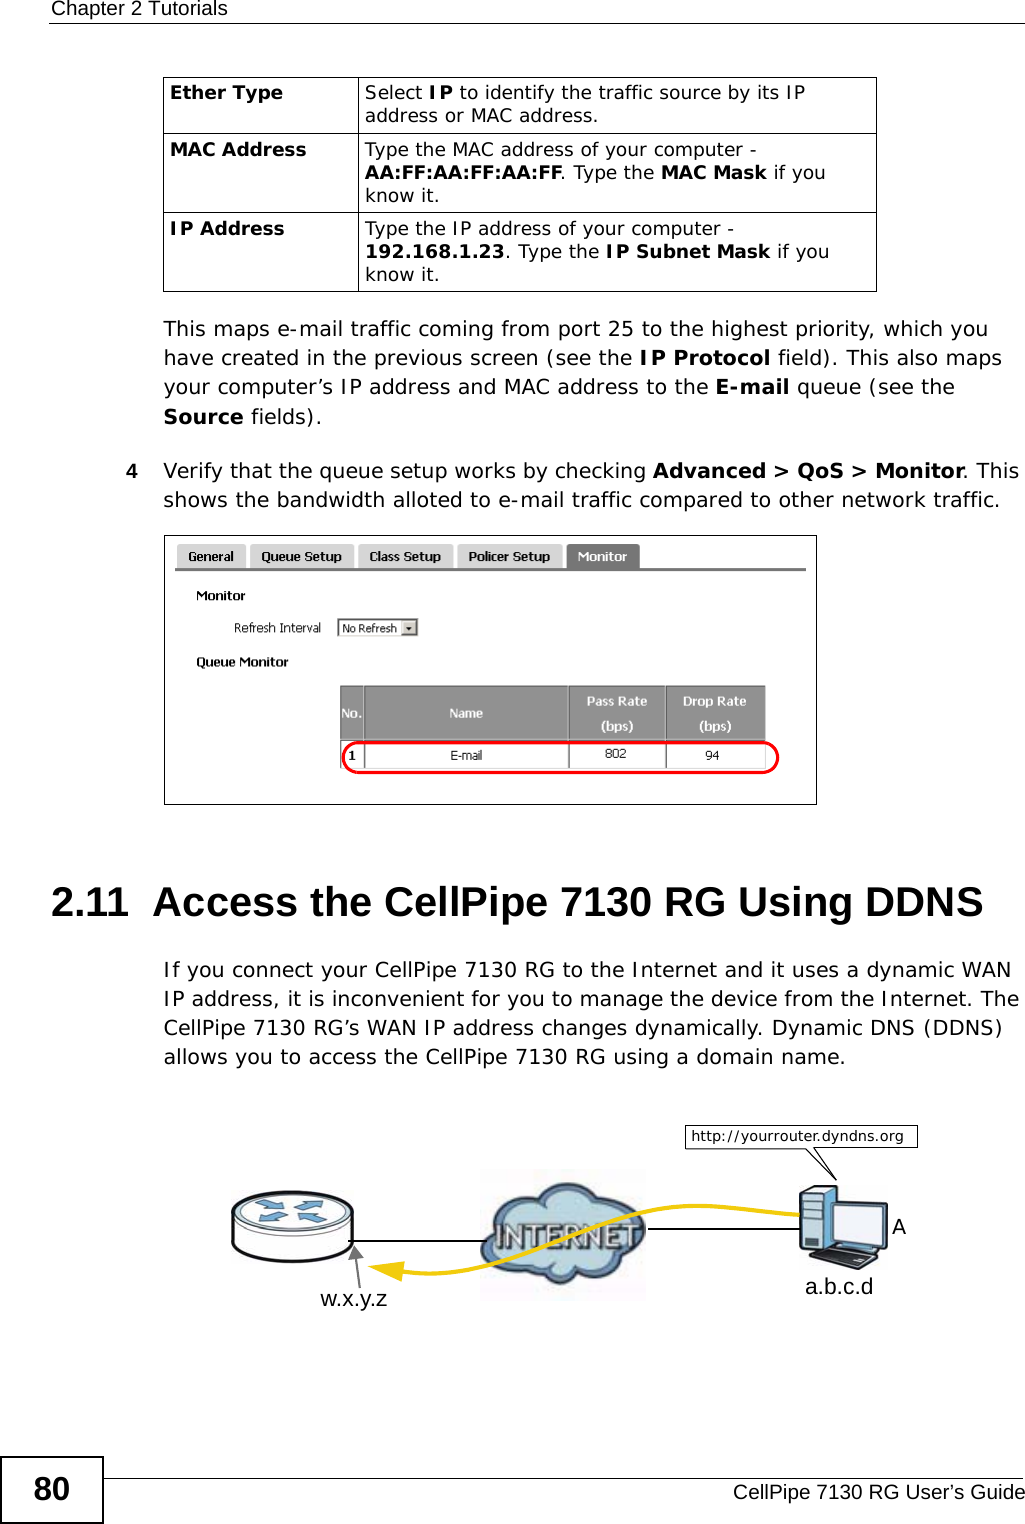 Chapter 2 TutorialsCellPipe 7130 RG User’s Guide80This maps e-mail traffic coming from port 25 to the highest priority, which you have created in the previous screen (see the IP Protocol field). This also maps your computer’s IP address and MAC address to the E-mail queue (see the Source fields). 4Verify that the queue setup works by checking Advanced &gt; QoS &gt; Monitor. This shows the bandwidth alloted to e-mail traffic compared to other network traffic.Tutorial: Advanced &gt; QoS &gt; Monitor2.11  Access the CellPipe 7130 RG Using DDNSIf you connect your CellPipe 7130 RG to the Internet and it uses a dynamic WAN IP address, it is inconvenient for you to manage the device from the Internet. The CellPipe 7130 RG’s WAN IP address changes dynamically. Dynamic DNS (DDNS) allows you to access the CellPipe 7130 RG using a domain name. Ether Type Select IP to identify the traffic source by its IP address or MAC address.MAC Address Type the MAC address of your computer - AA:FF:AA:FF:AA:FF. Type the MAC Mask if you know it.IP Address Type the IP address of your computer - 192.168.1.23. Type the IP Subnet Mask if you know it.w.x.y.z a.b.c.dhttp://yourrouter.dyndns.orgA